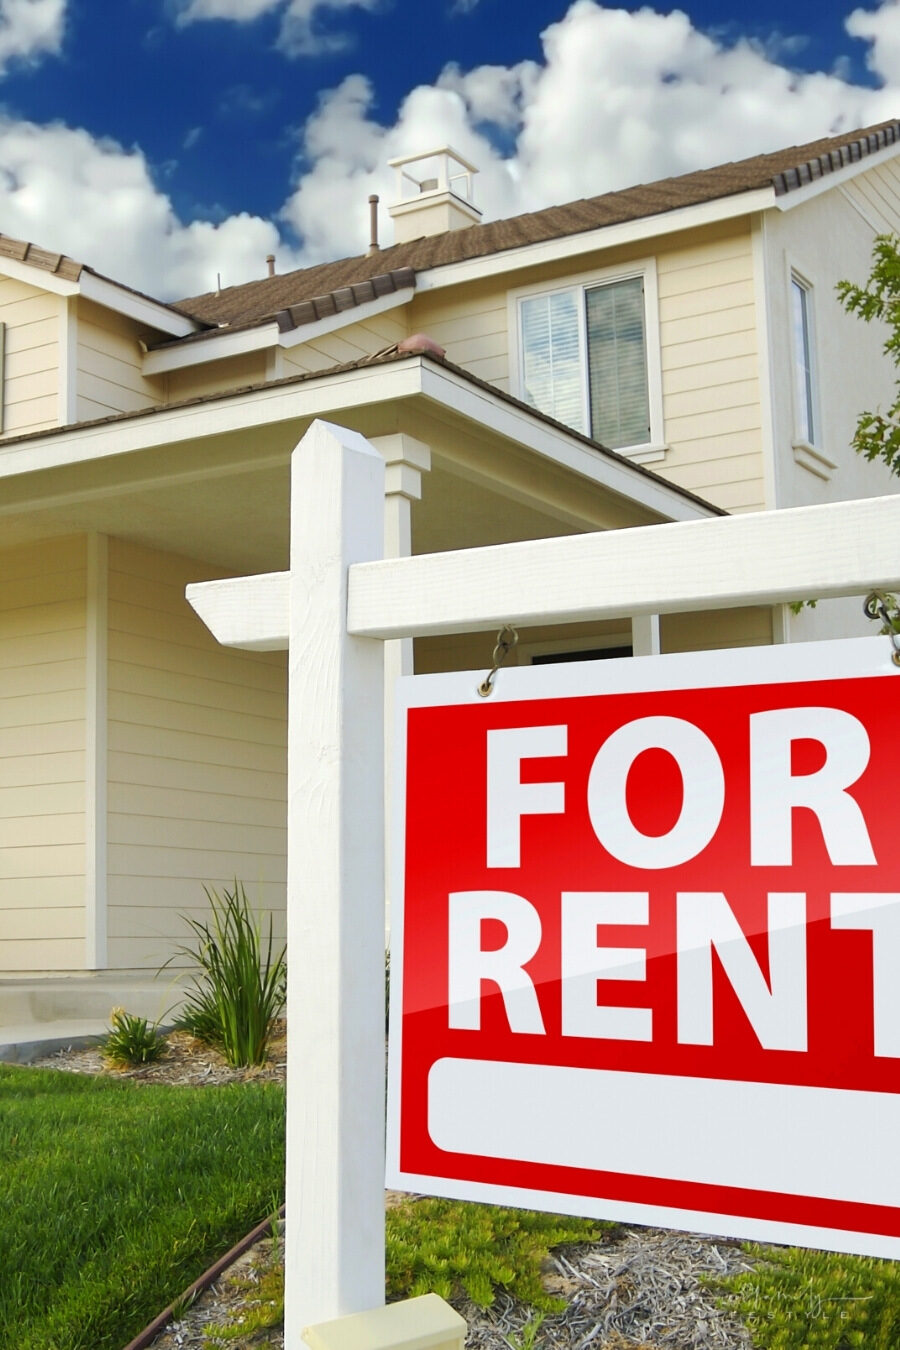 Take These Actionable Steps to Protect Yourself As a Renter